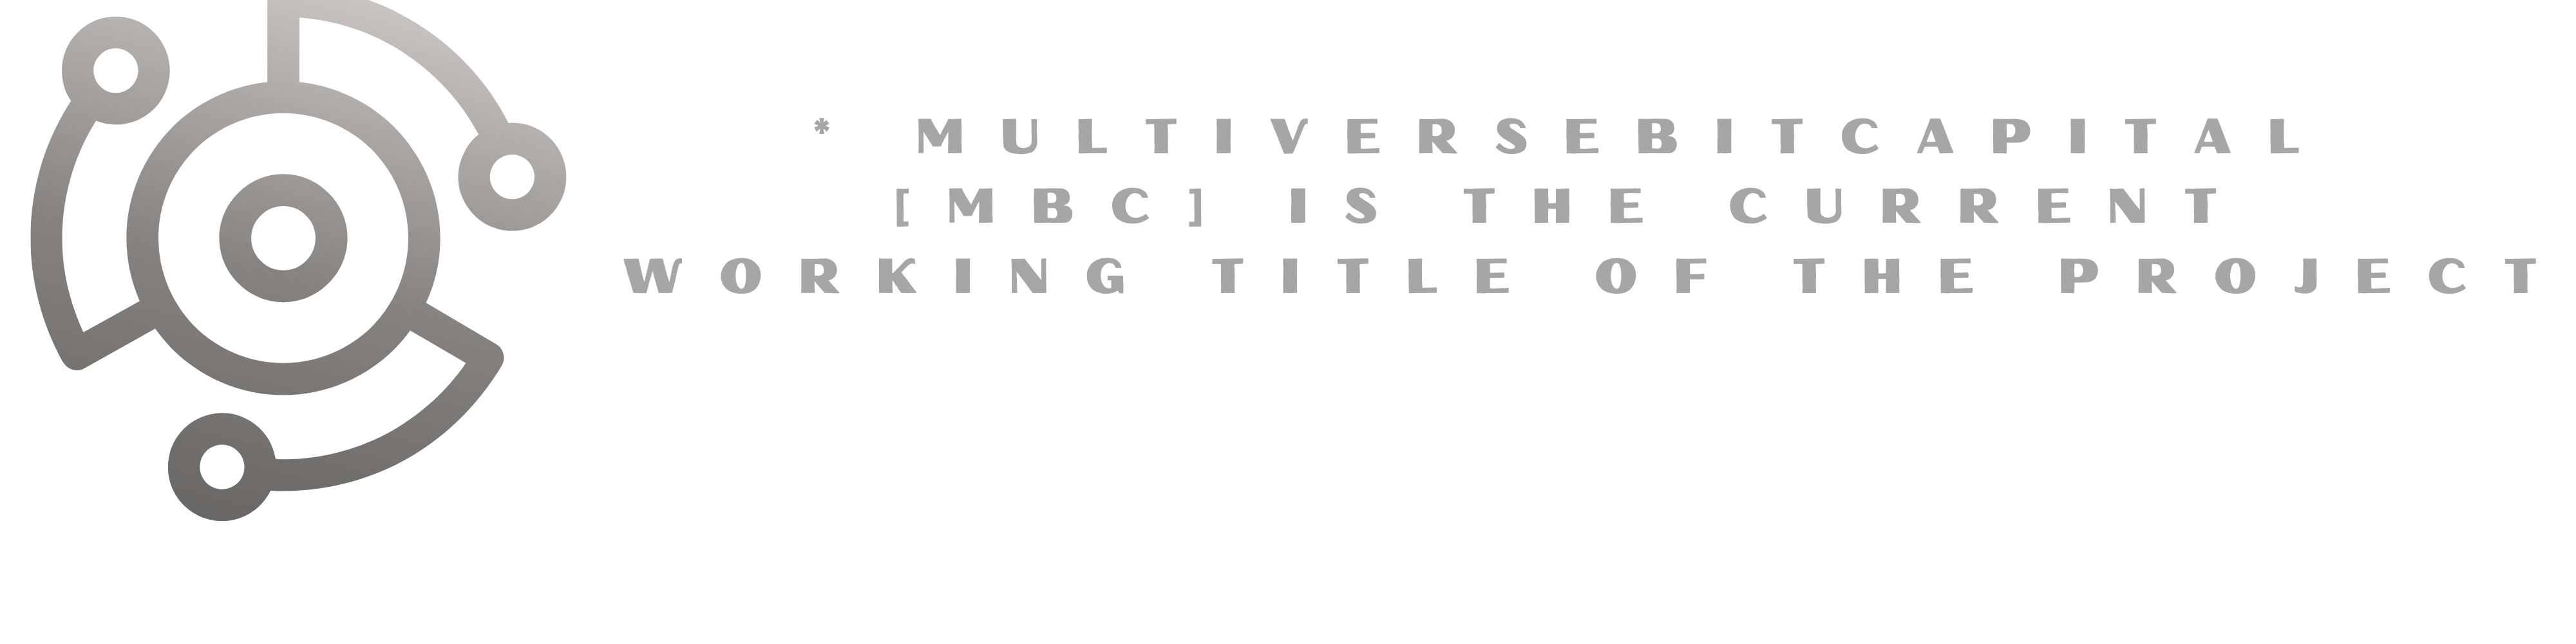 * MultiverseBitCapital [MBC] is the current working Title of the project